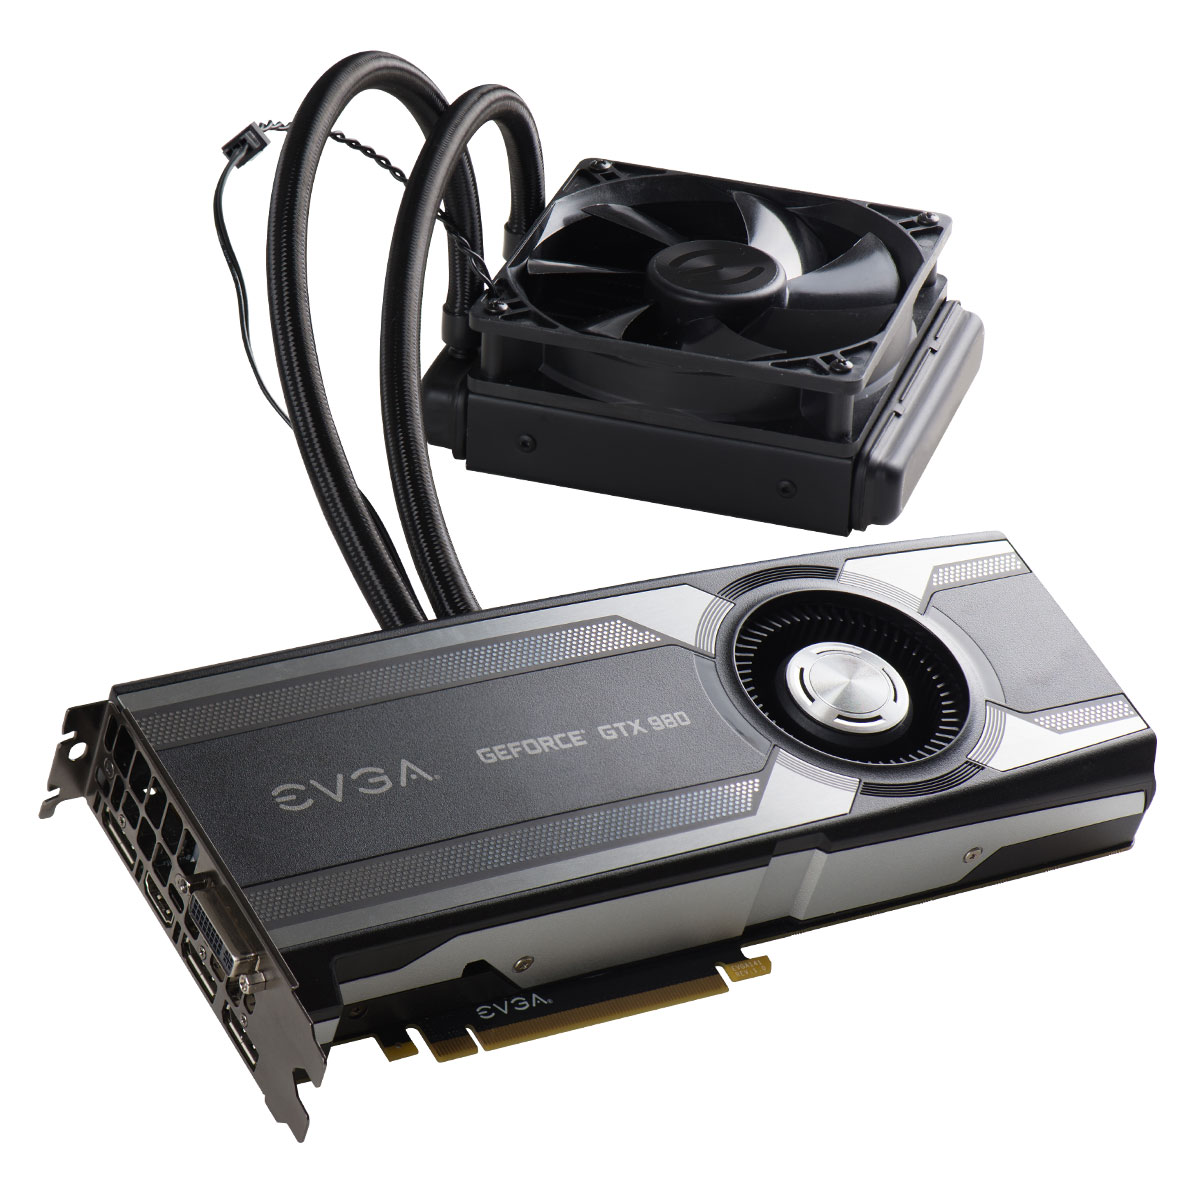 Media asset in full size related to 3dfxzone.it news item entitled as follows: EVGA lancia la video card GeForce GTX 980 HYBRID 4GB | Image Name: news22383_EVGA-GeForce-GTX-980-HYBRID_1.jpg